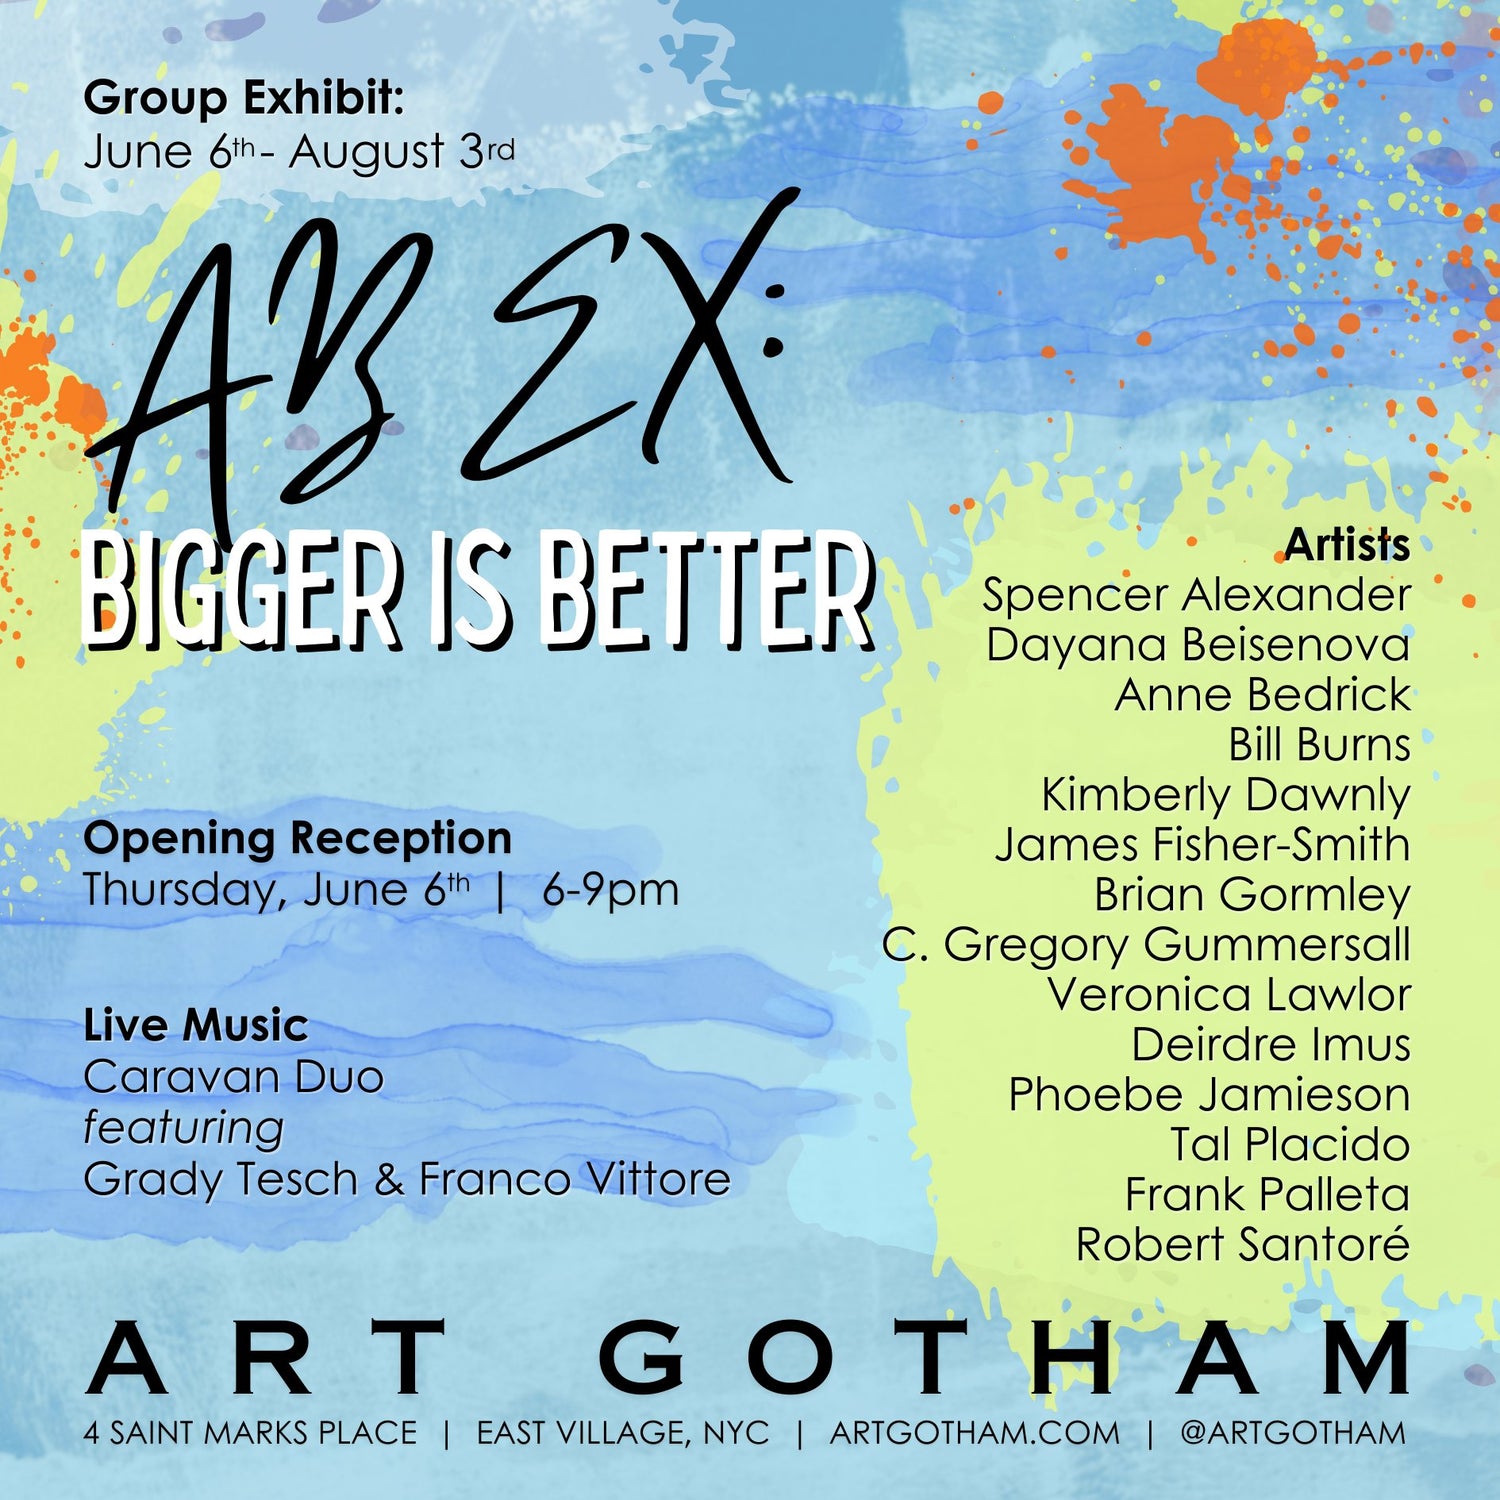 A Group Exhibit | AB EX: Bigger is Better